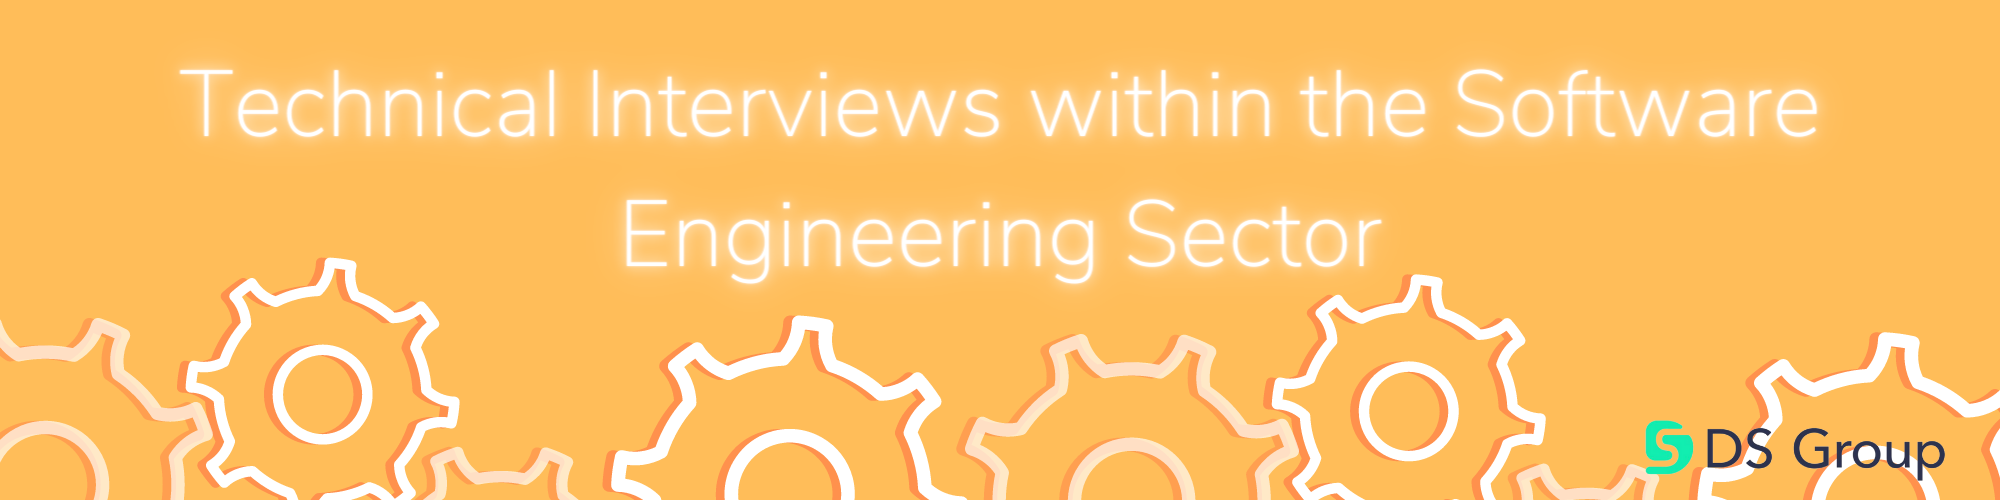 Technical Interviews within the Software Engineering Sector